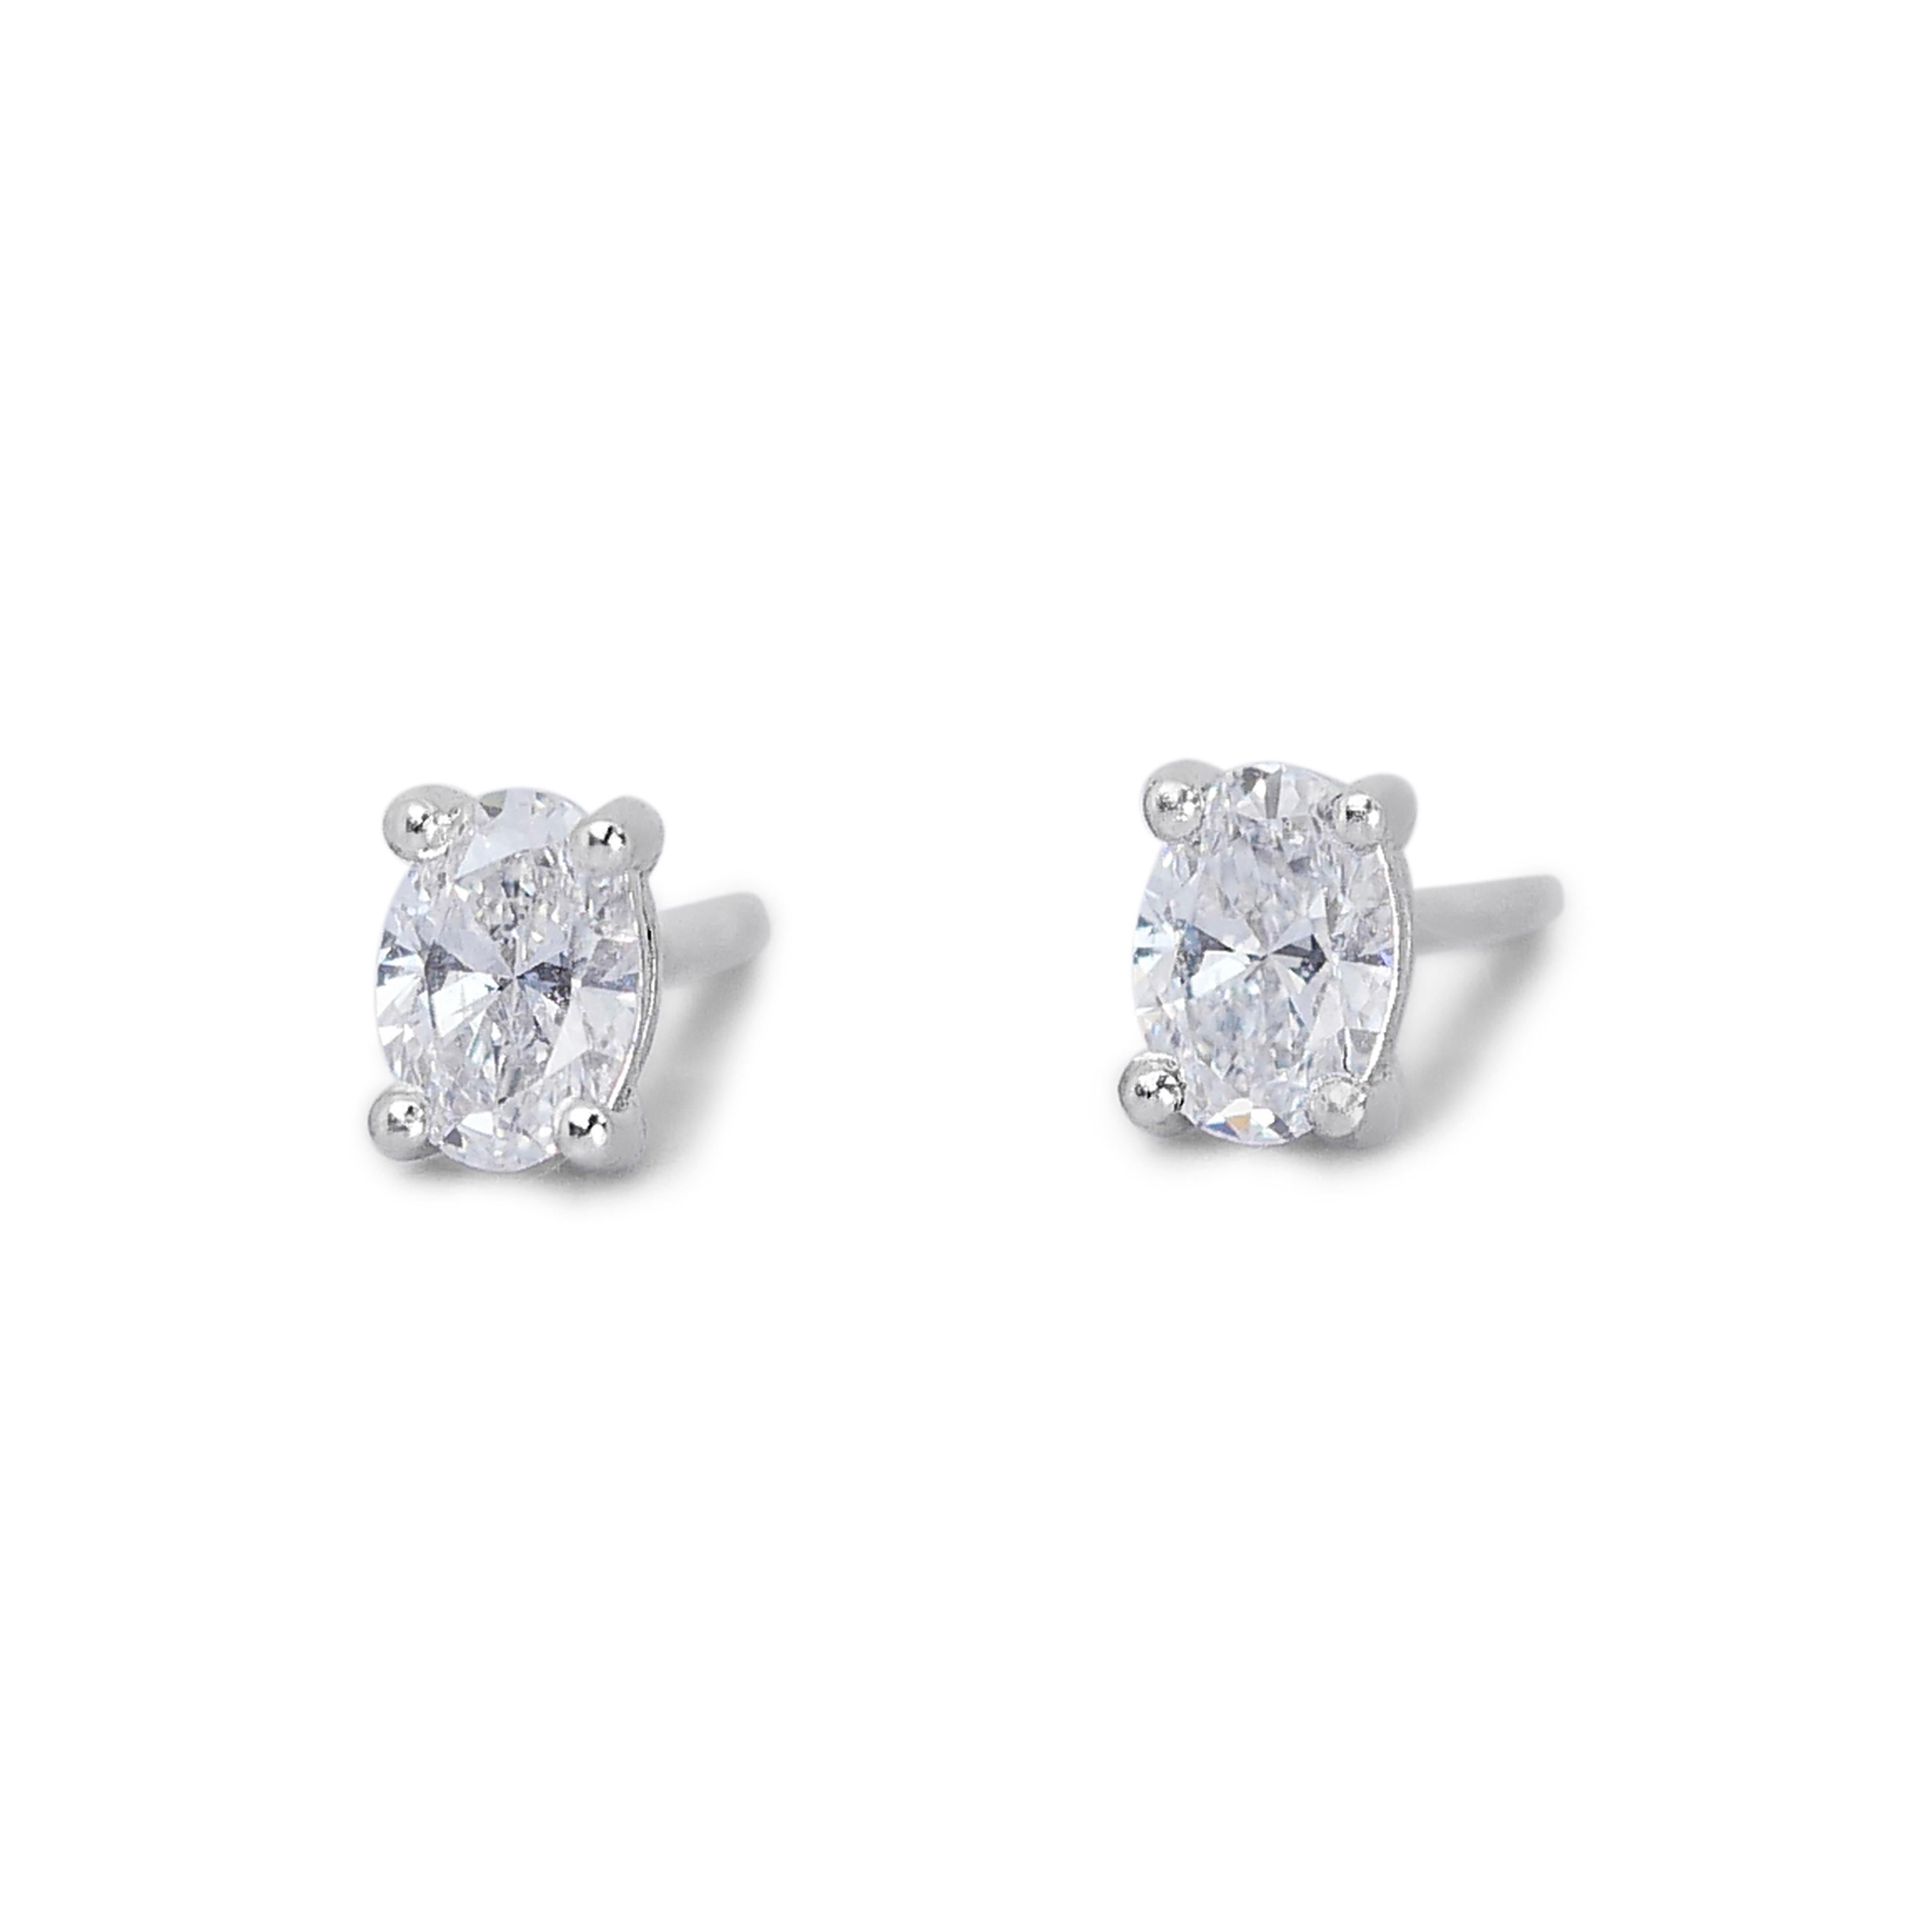 Brilliant 18K White Gold Natural Diamonds Stud Earrings w/1.41 Carat - GIA Certified

Featuring our 18K White Gold Natural Diamonds Stud Earrings with total of 1.41 carats of sparkling diamonds. Each earring boasts a stunning center stone,